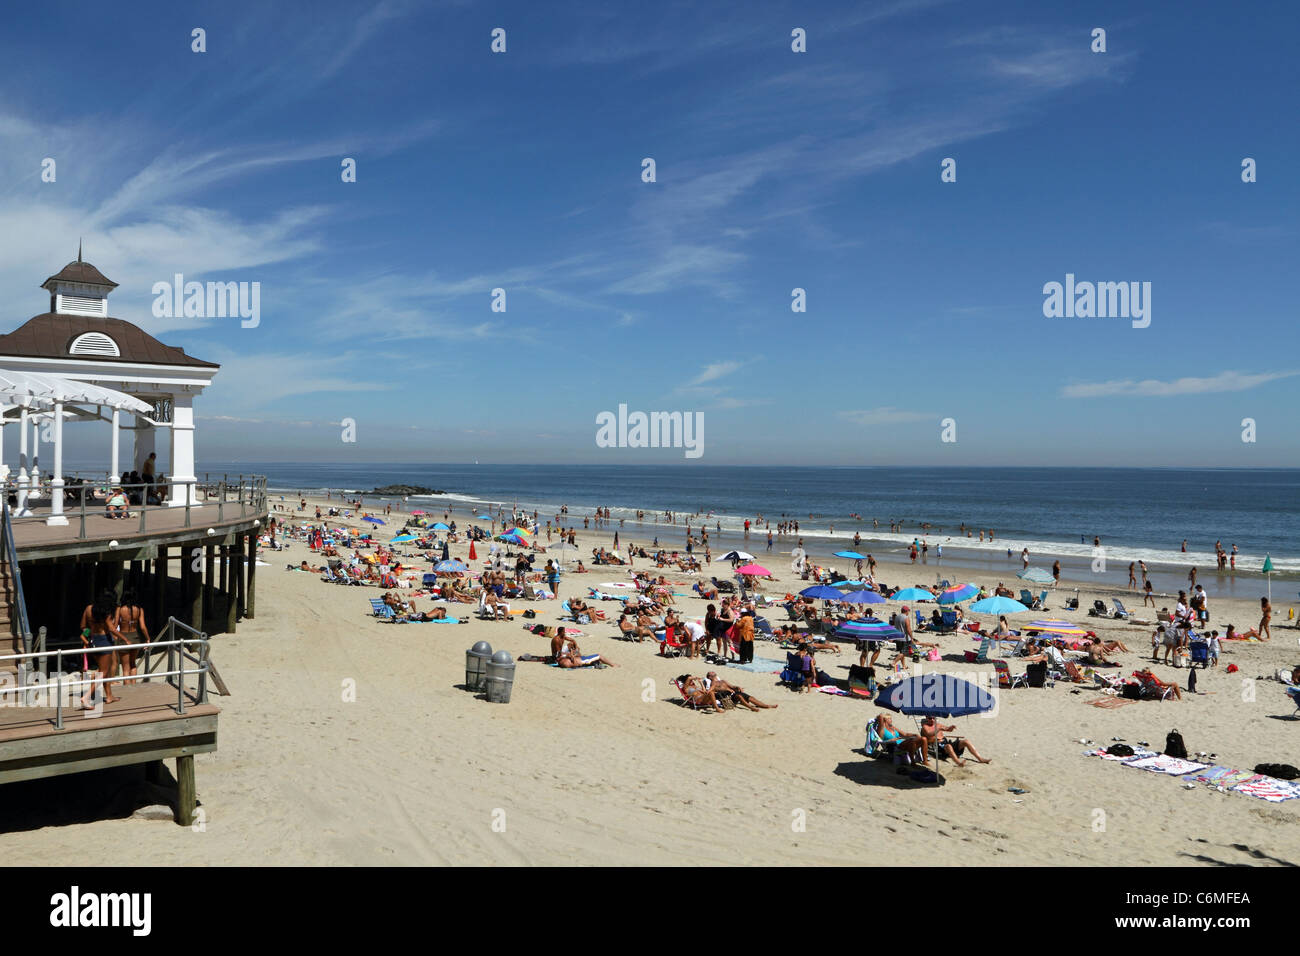 The beach in Long Branch, New Jersey, USA. A popular shore destination  Stock Photo - Alamy